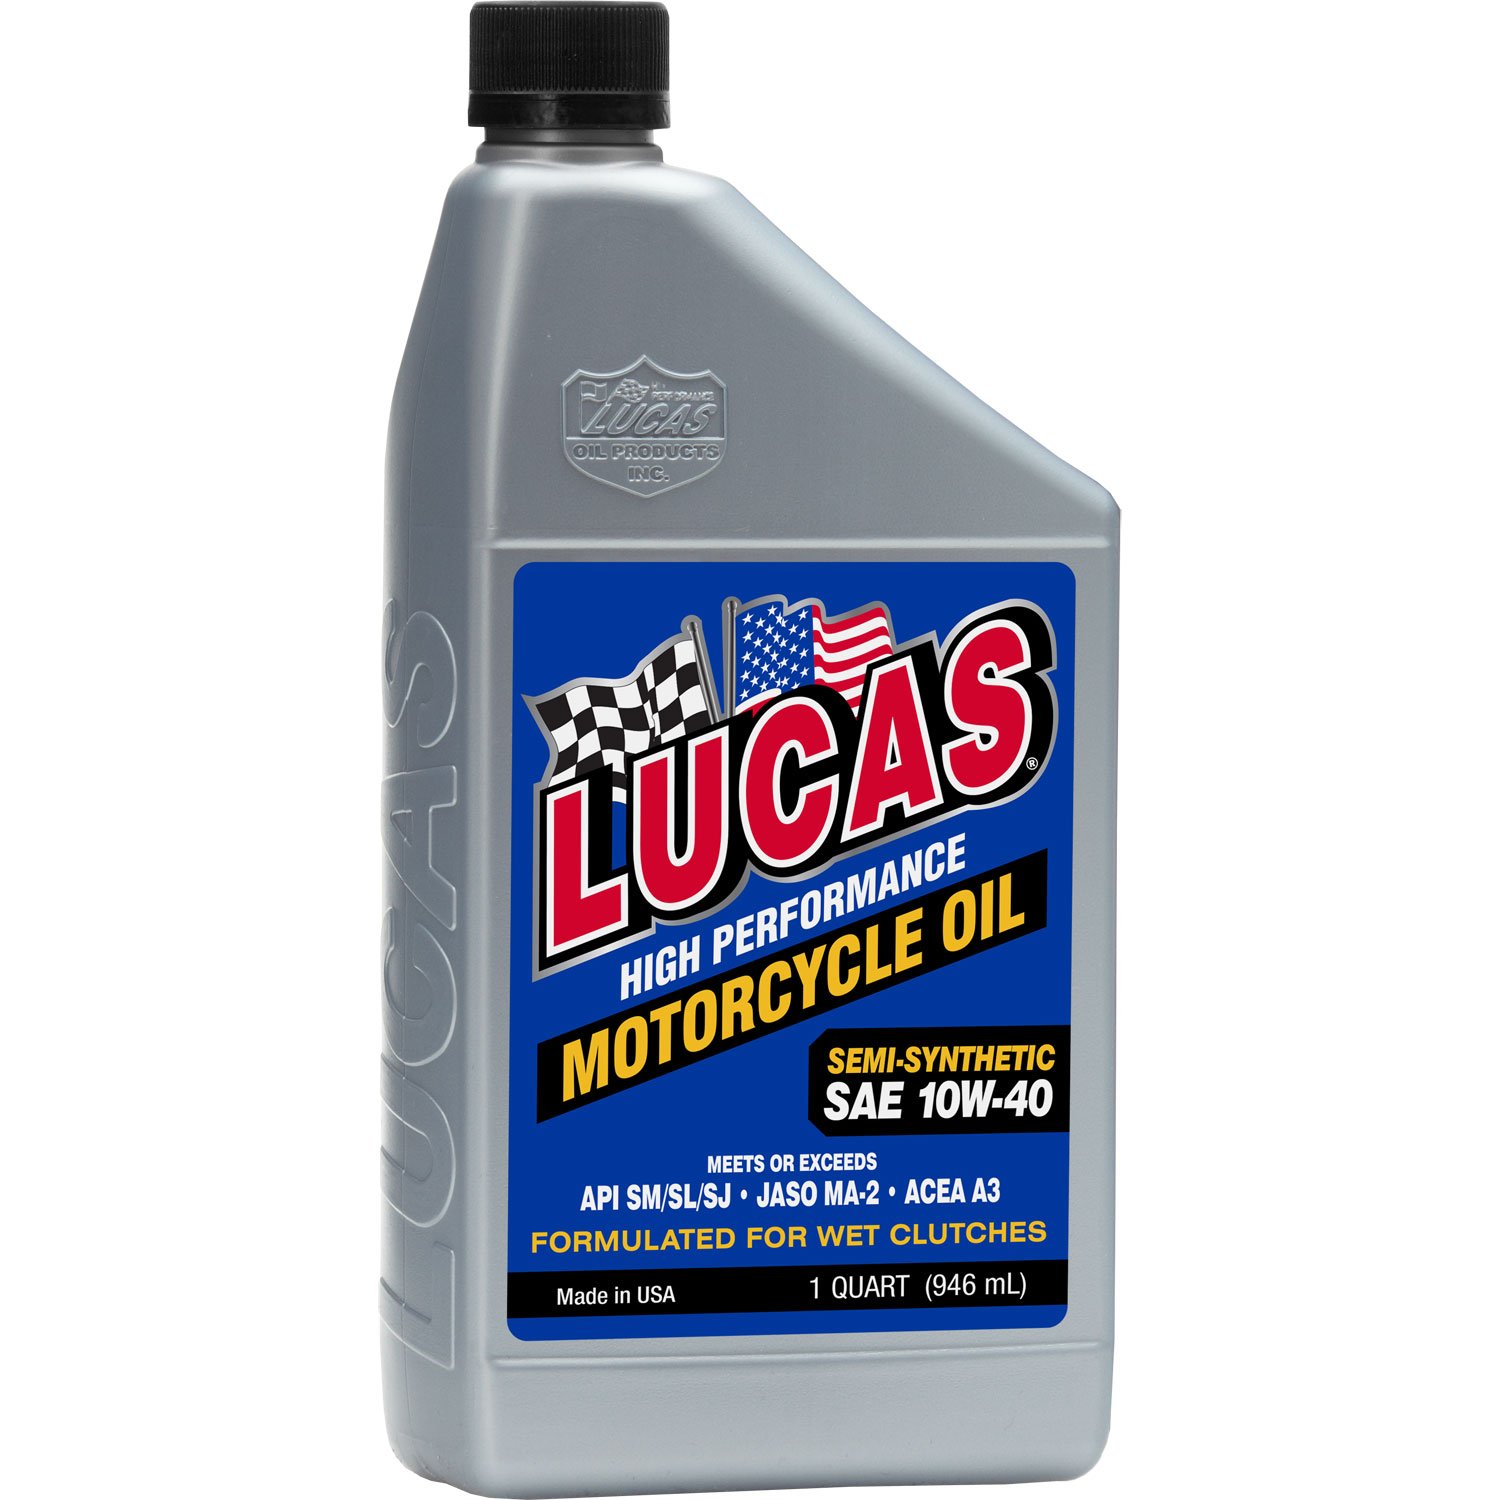 Semi-Synthetic SAE 10W-40 Motorcycle Oil 1-Quart